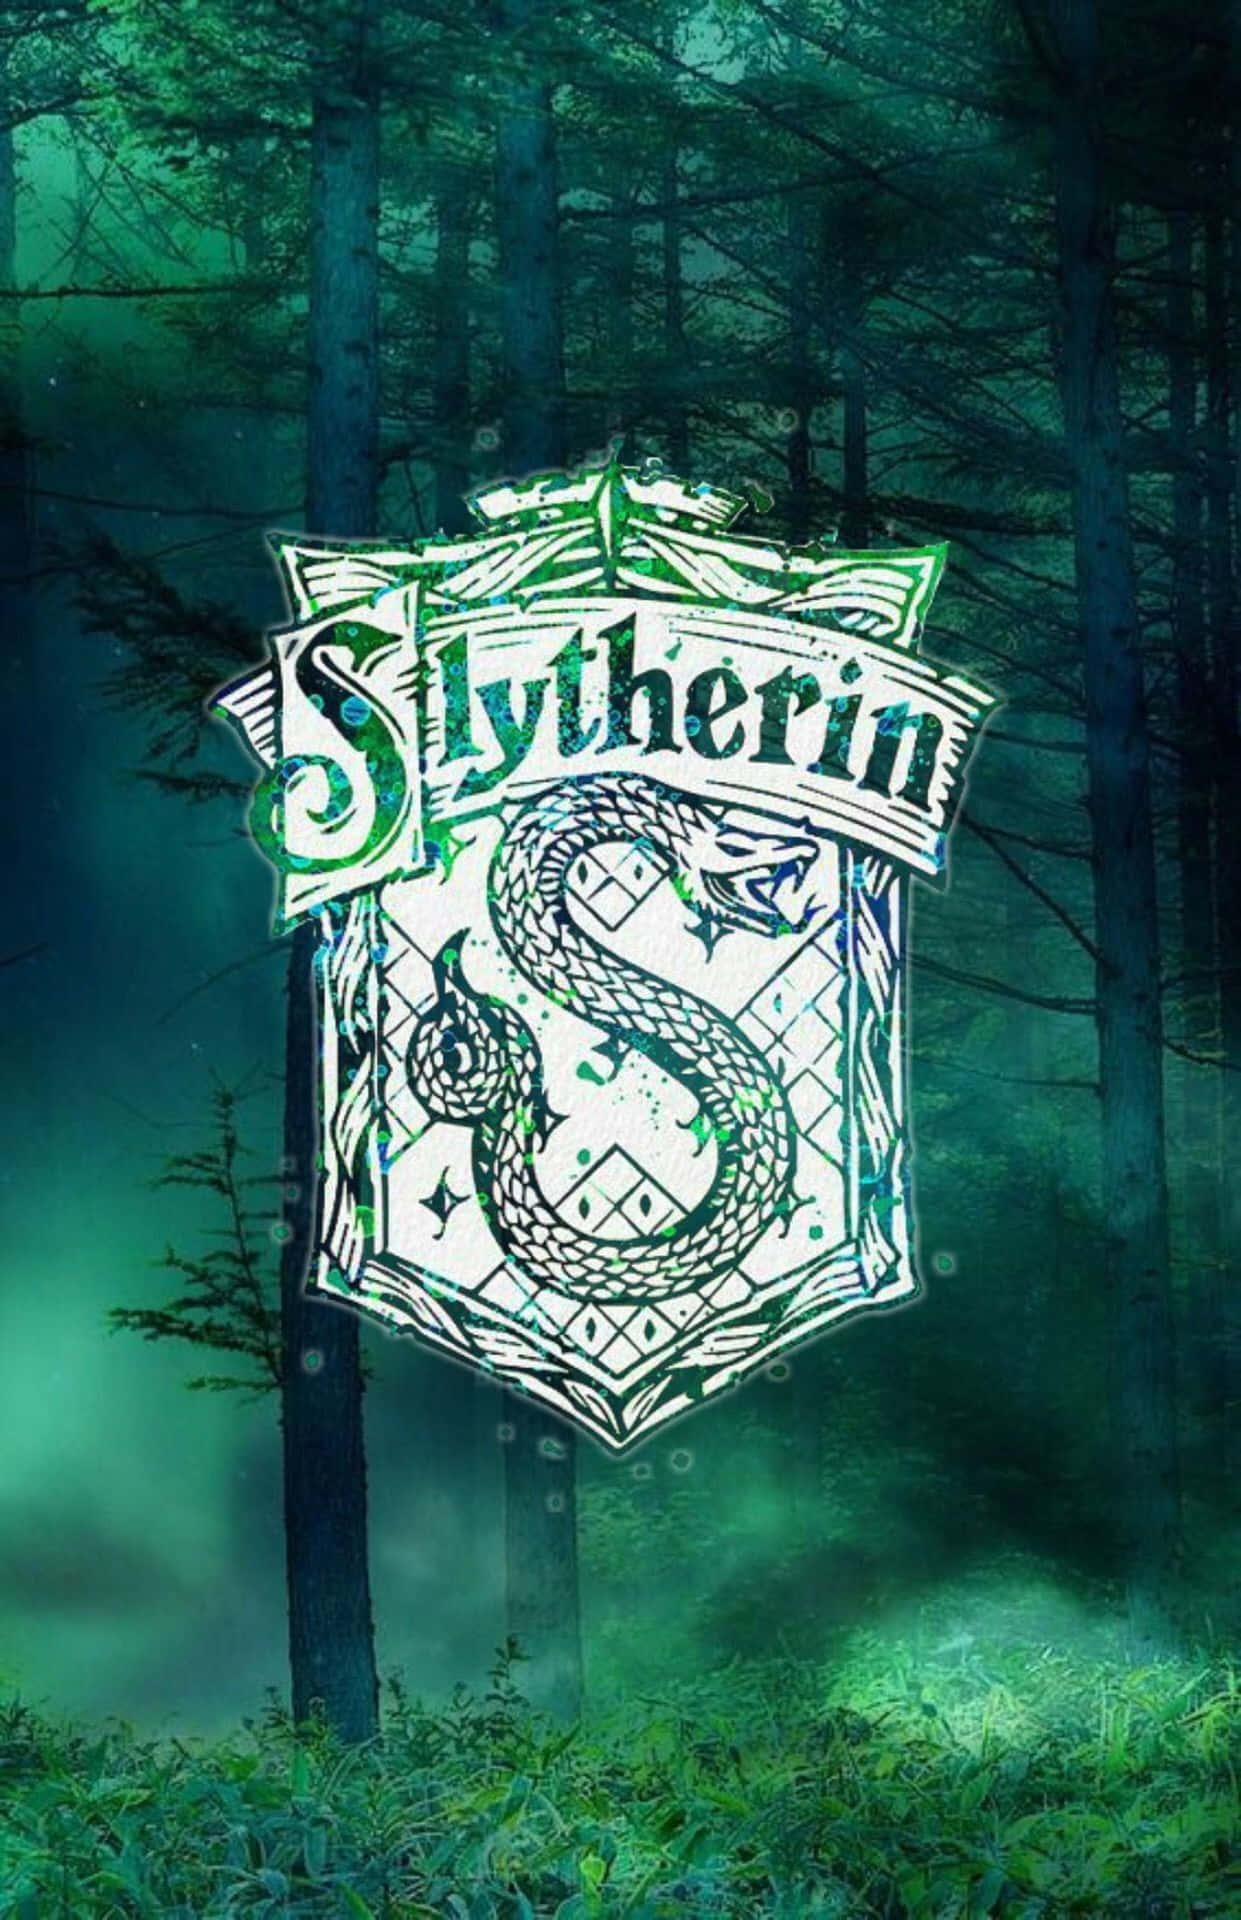 The Slytherin House Crest